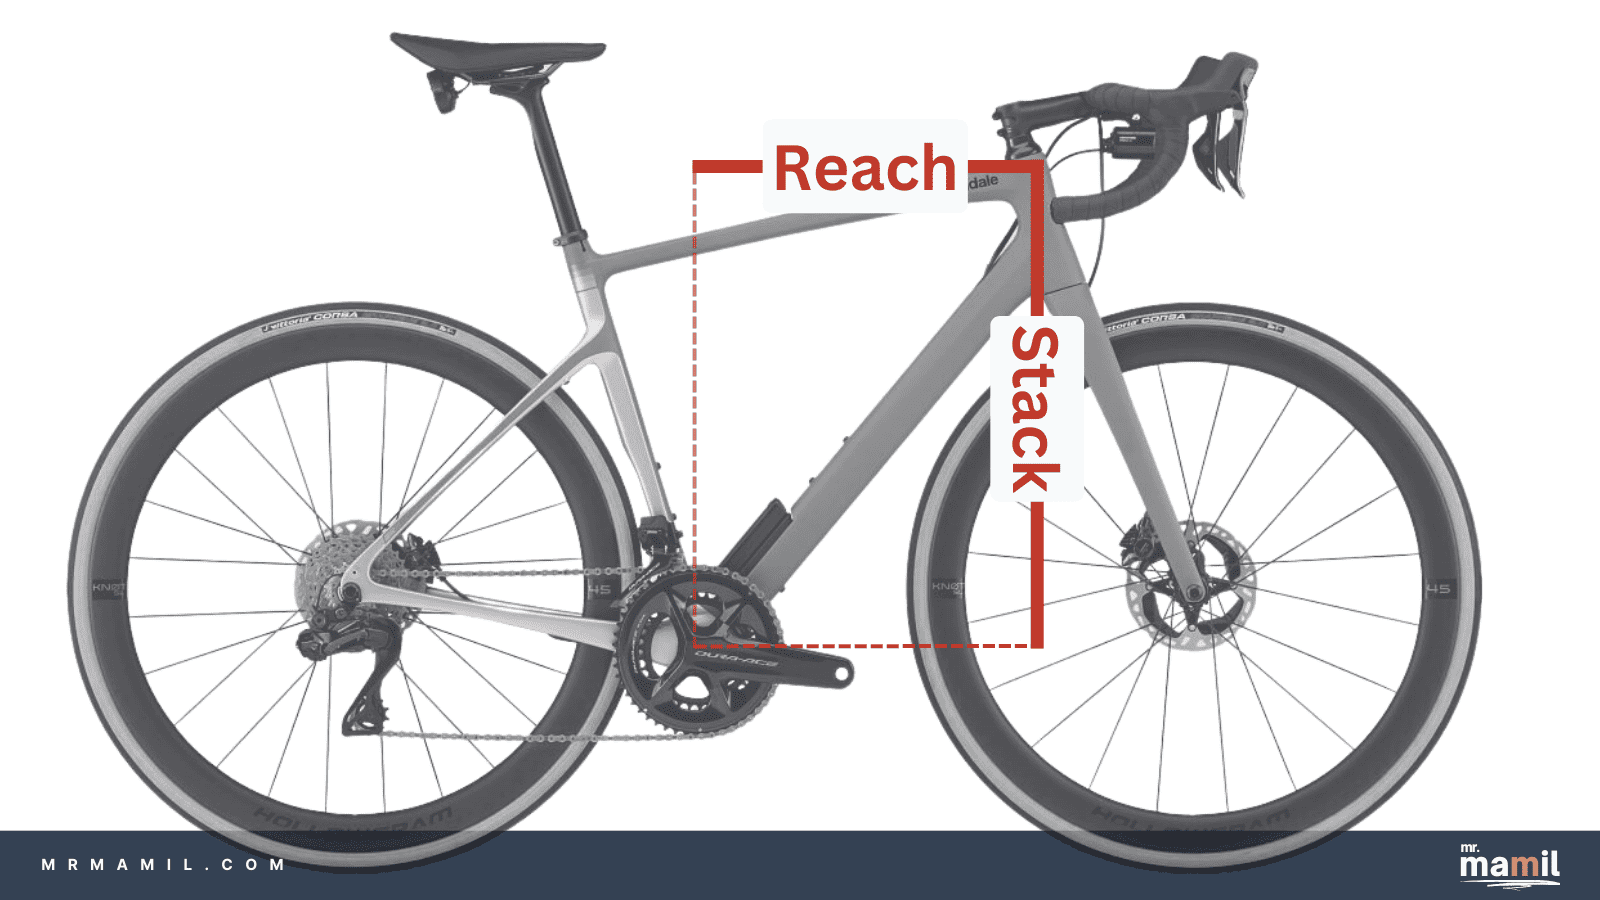 Diagram of a road bicycle illustrating bike geometry. Two main measurements are highlighted: 'Reach', represented by a horizontal dashed line from the center of the bottom bracket to the top center of the handlebar, and 'Stack', shown as a vertical dashed line from the center of the bottom bracket to the same handlebar point.